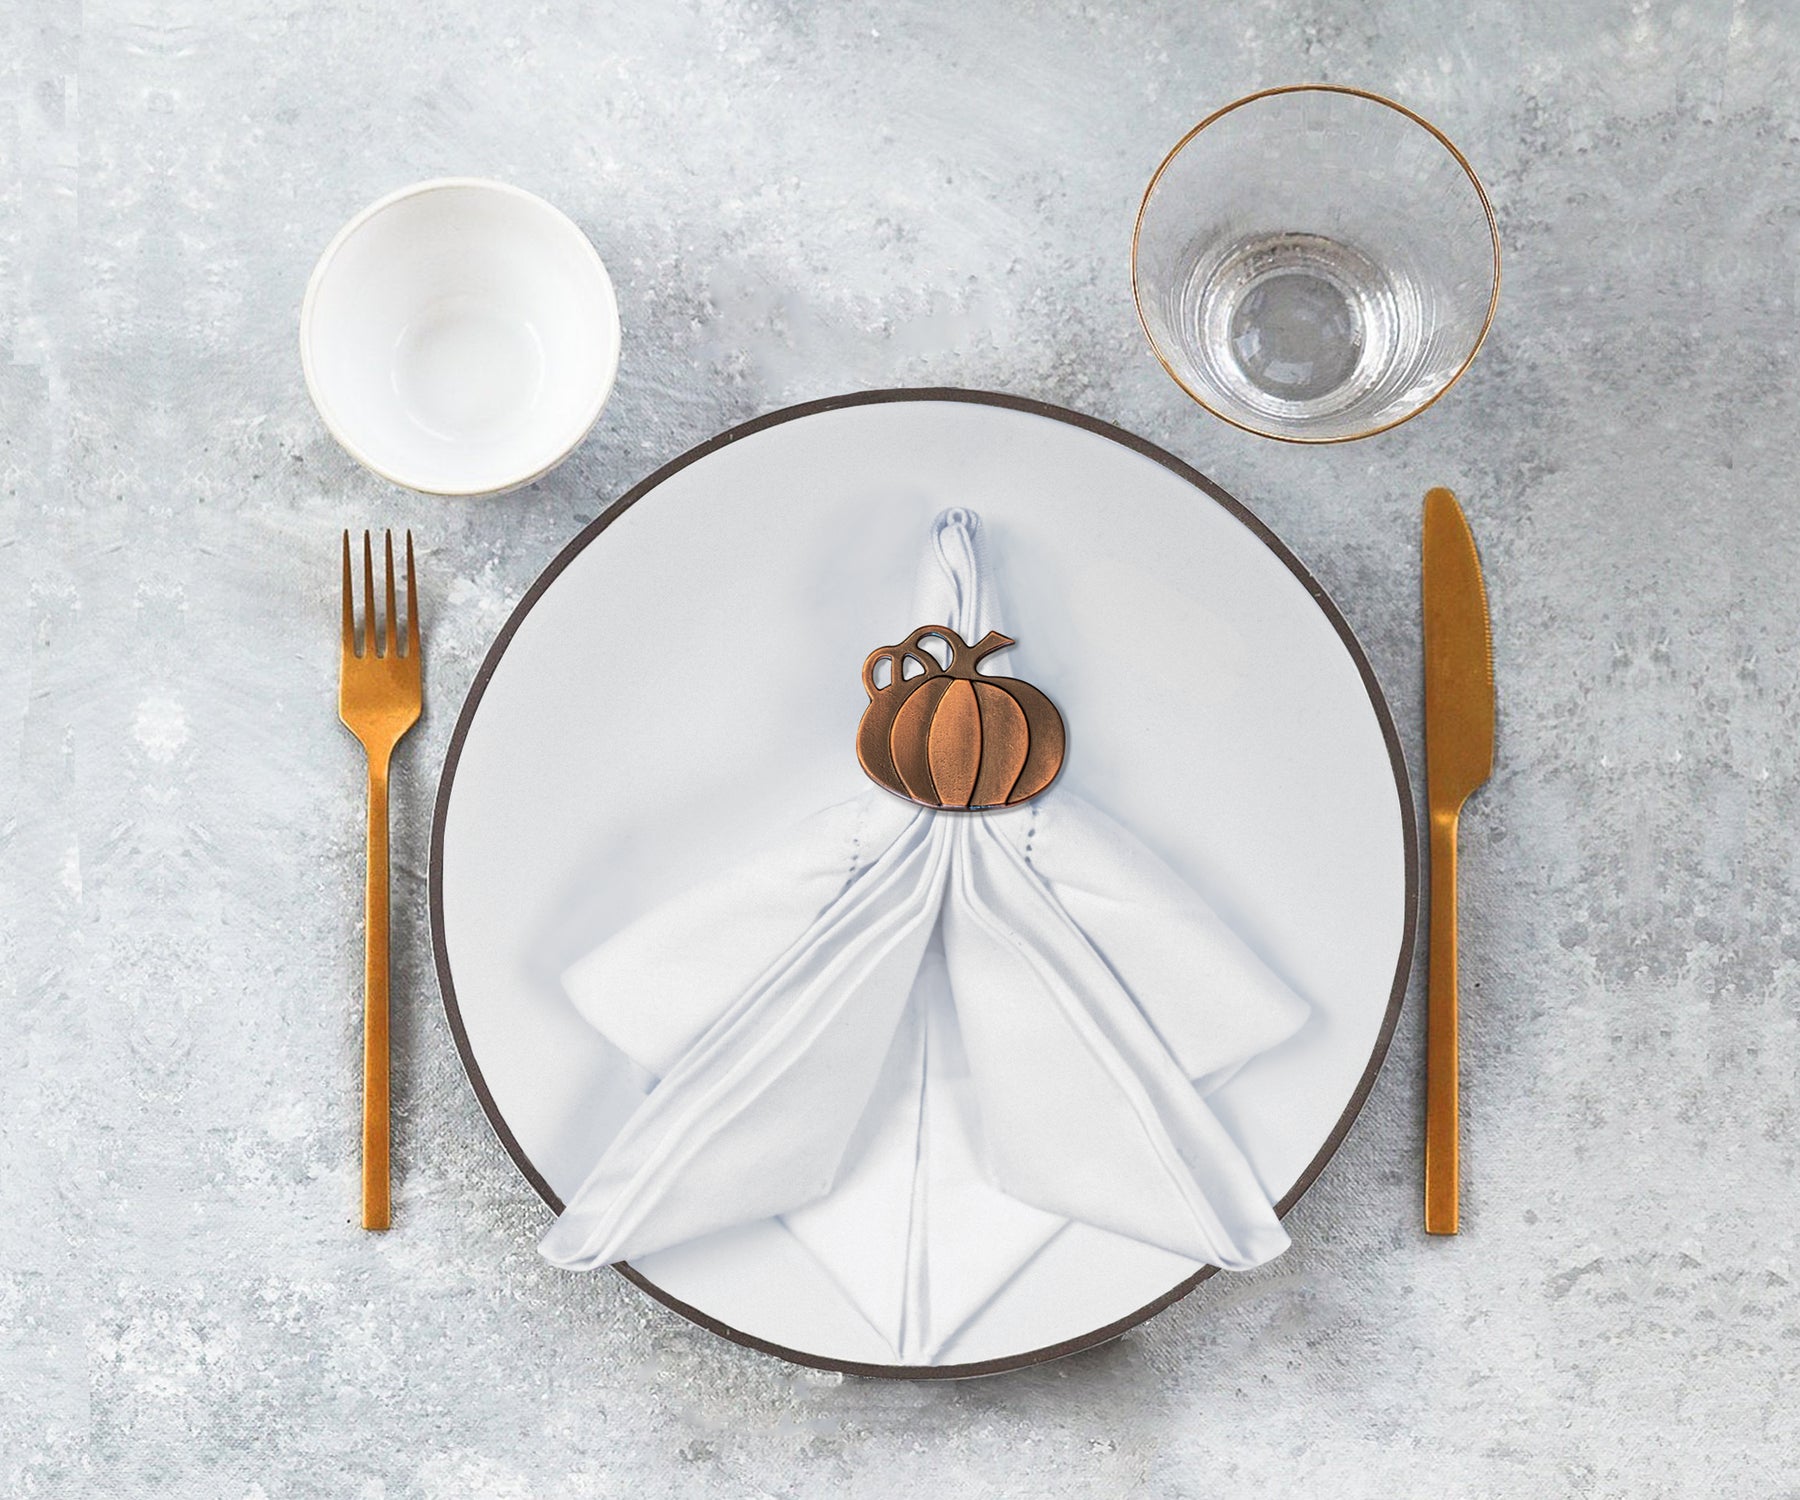 The classic white color effortlessly complements any tableware, allowing your culinary creations to take center stage. 